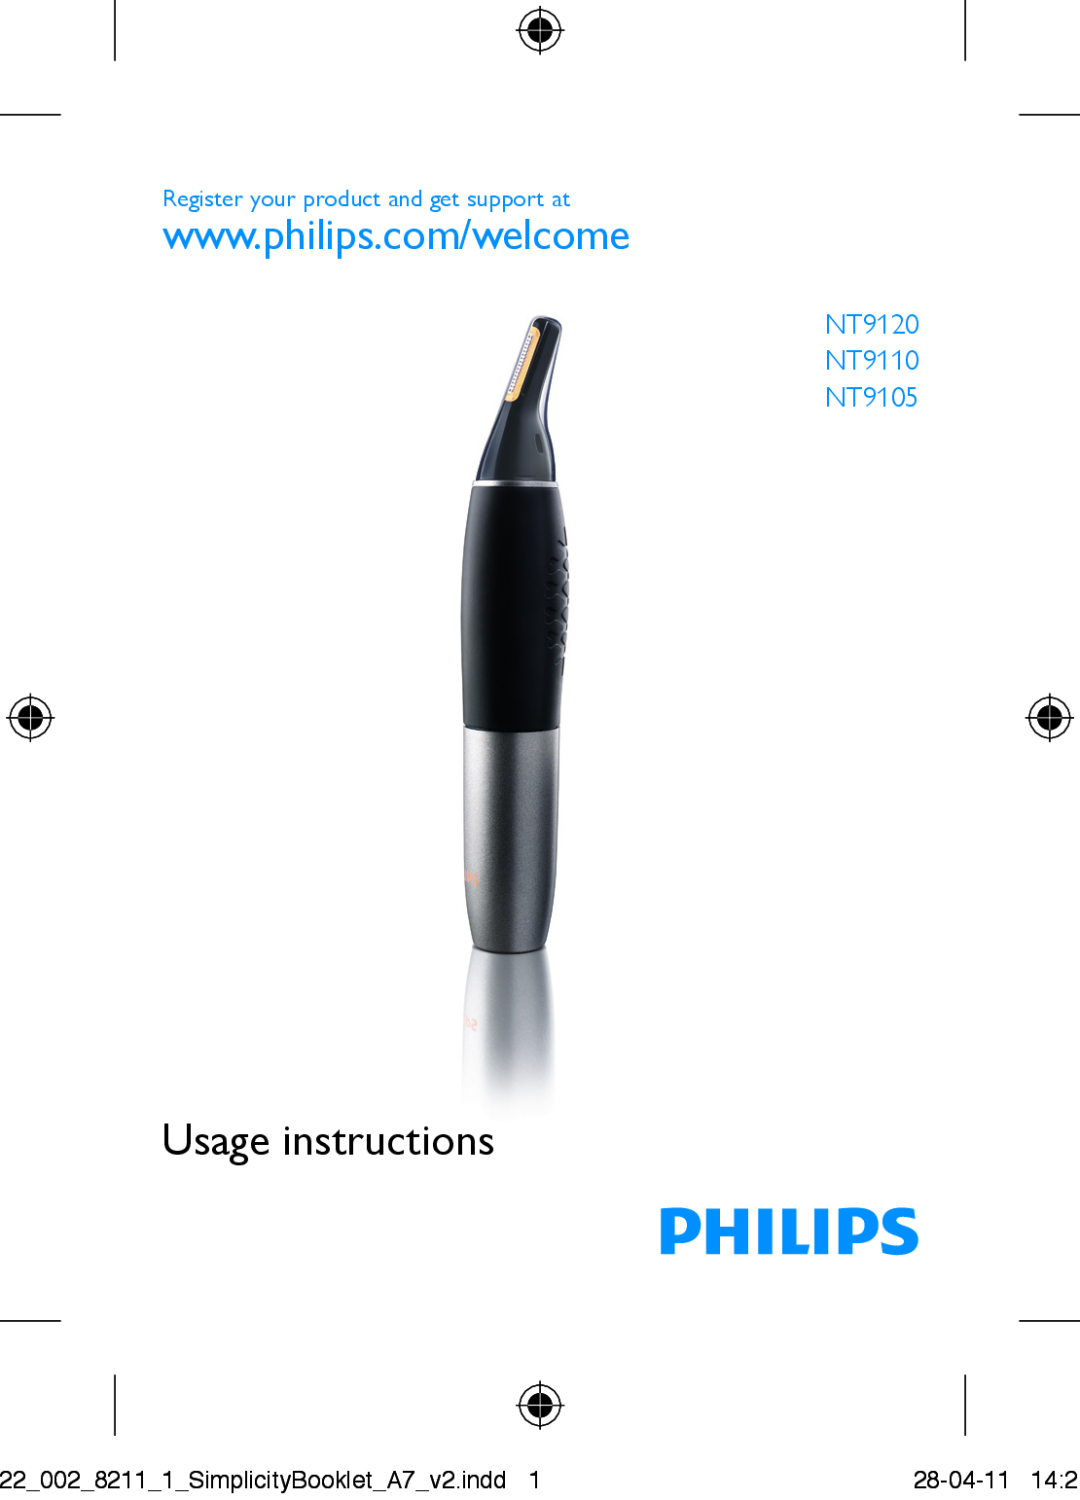 Philips manual 22 002 8211 1 SimplicityBooklet A7 v2.indd, 28-04-1114, Usage instructions, NT9120 NT9110 NT9105 